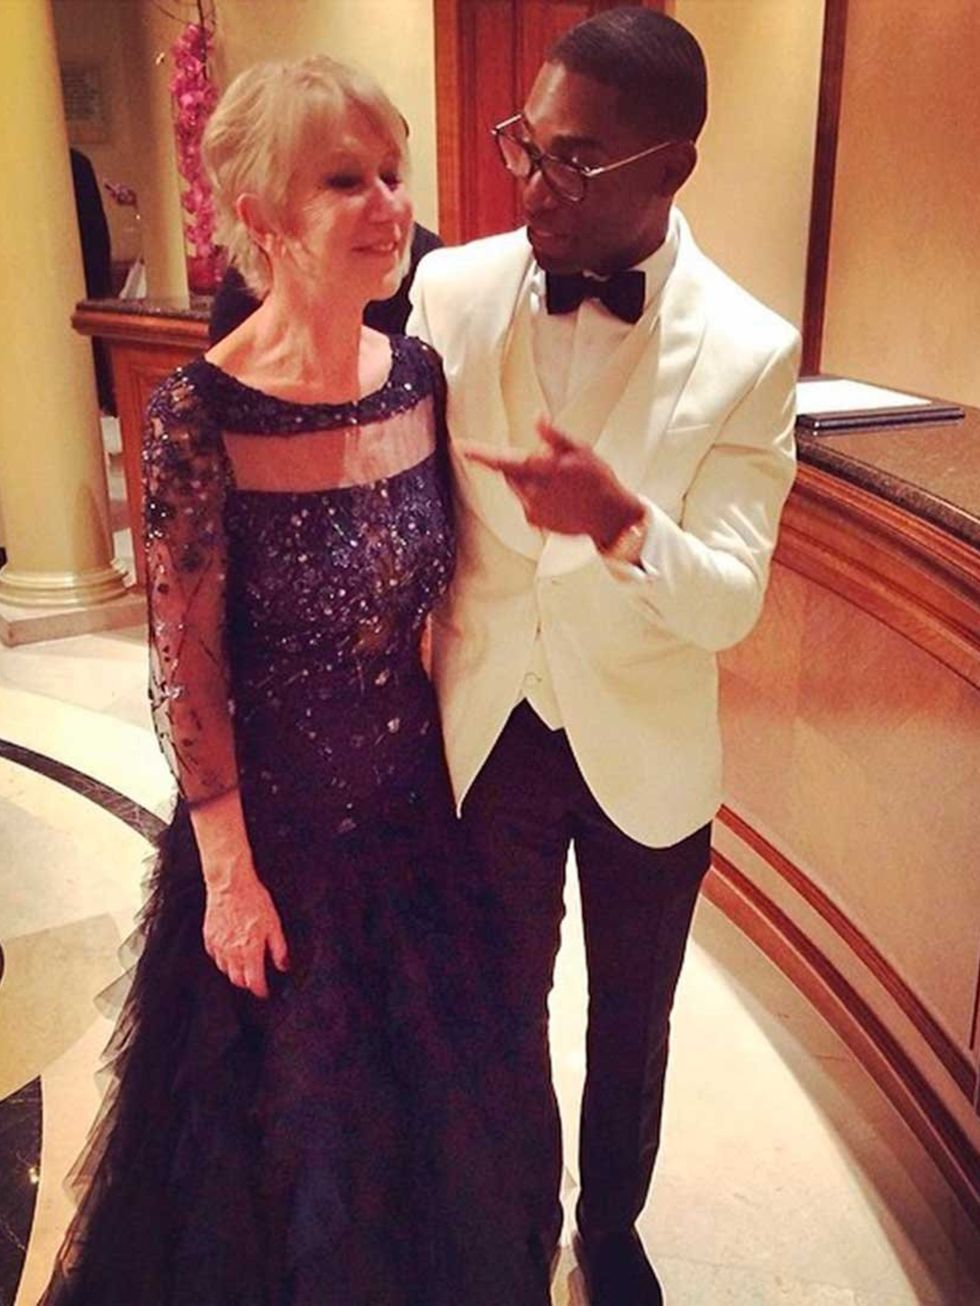 <p>Tinie Tempah:</p><p>'Some of the nicest words of the night came from this incredible woman here. So elegant and regal and one of my guilty pleasures congratulations on the Fellowship award and the kind words Dame Helen Mirren'</p>